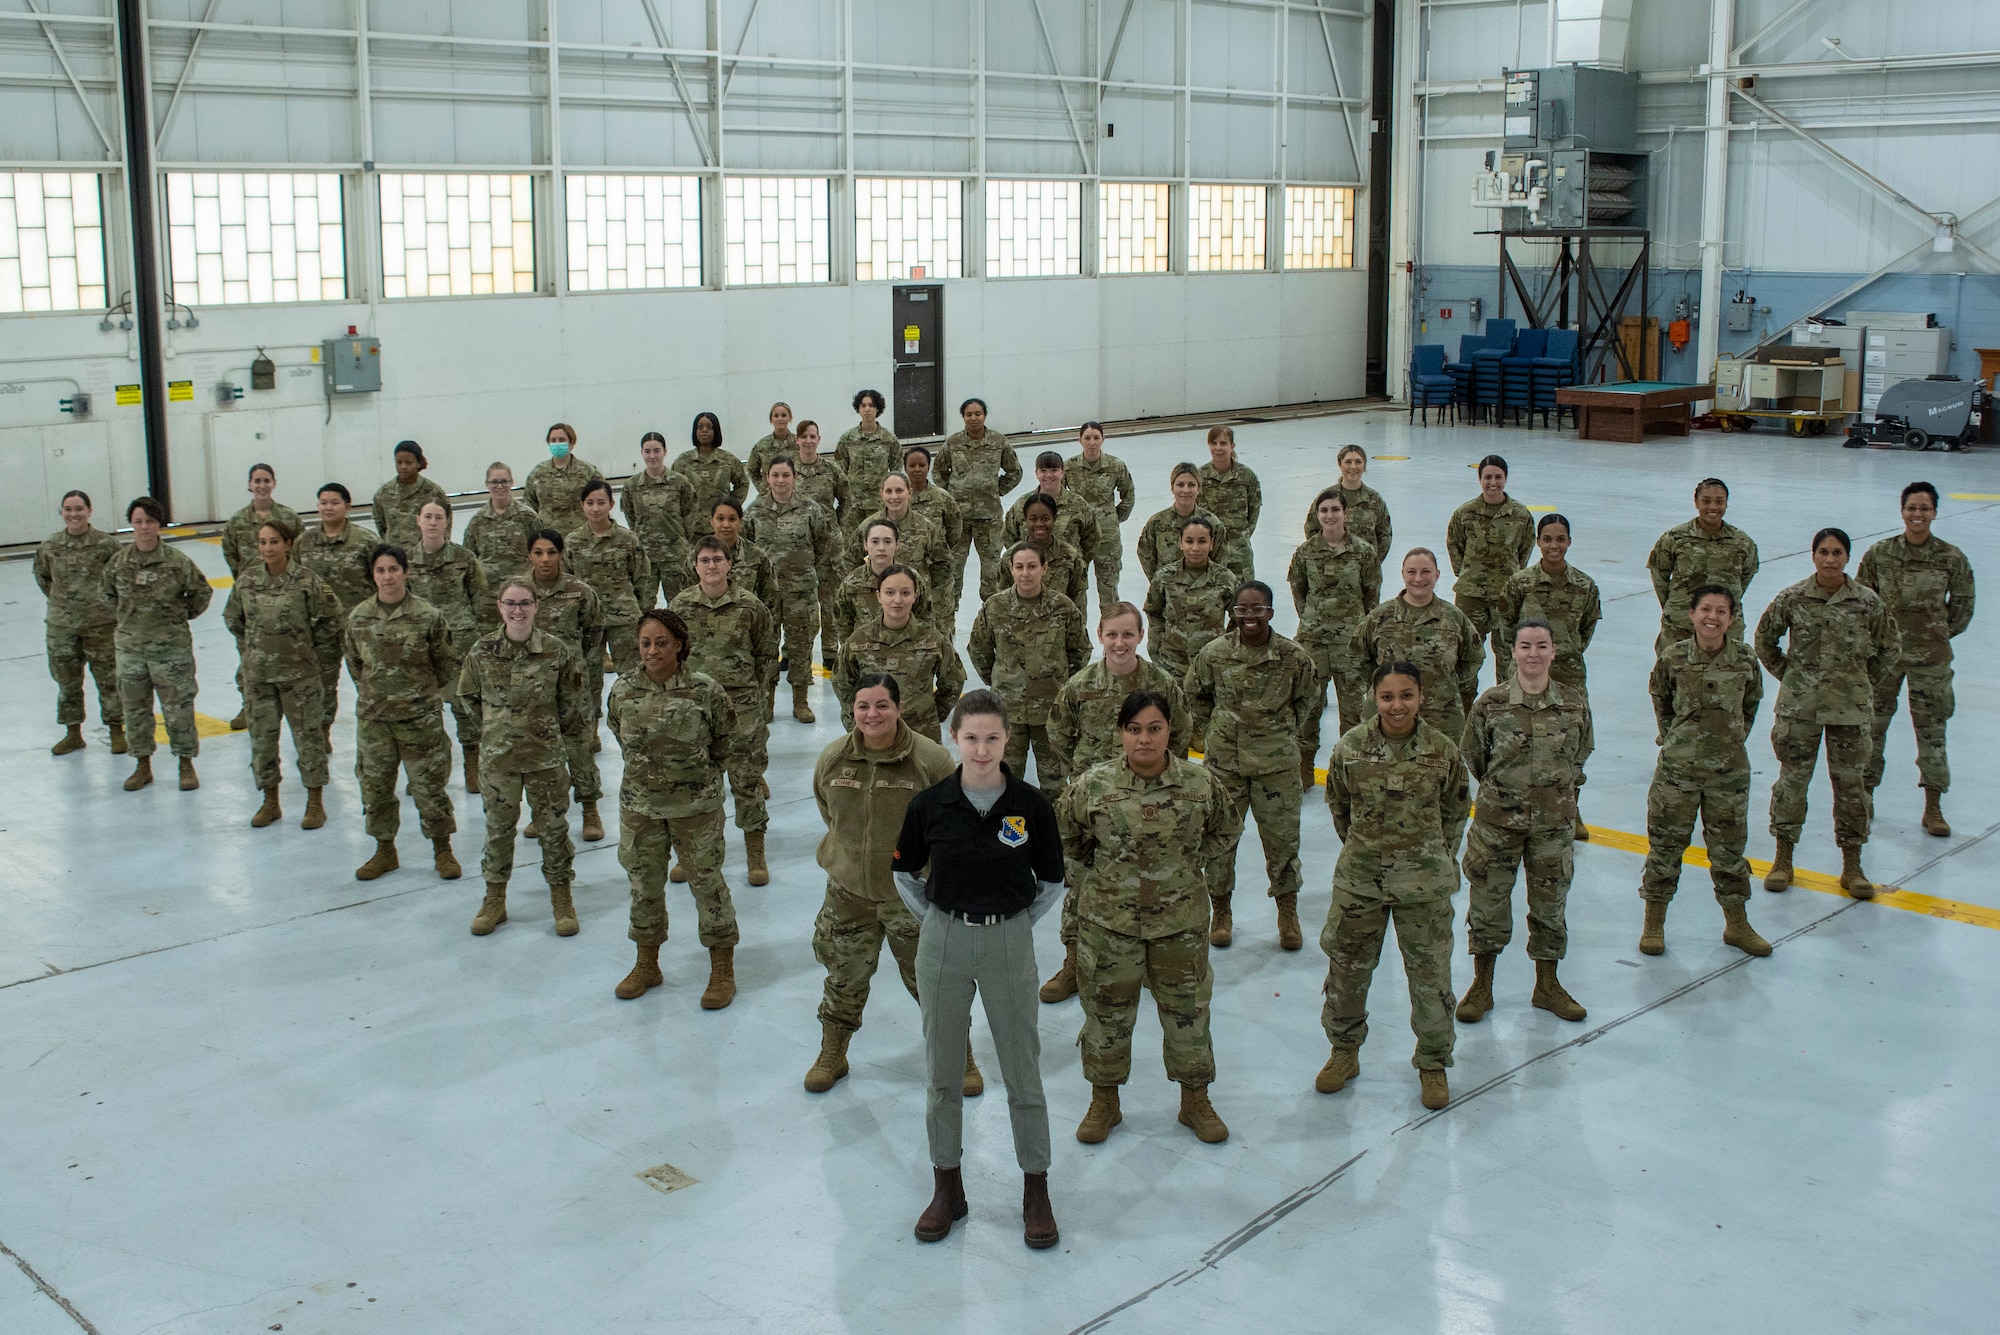 A group of Air National Guard women pose for a photo in uniform.